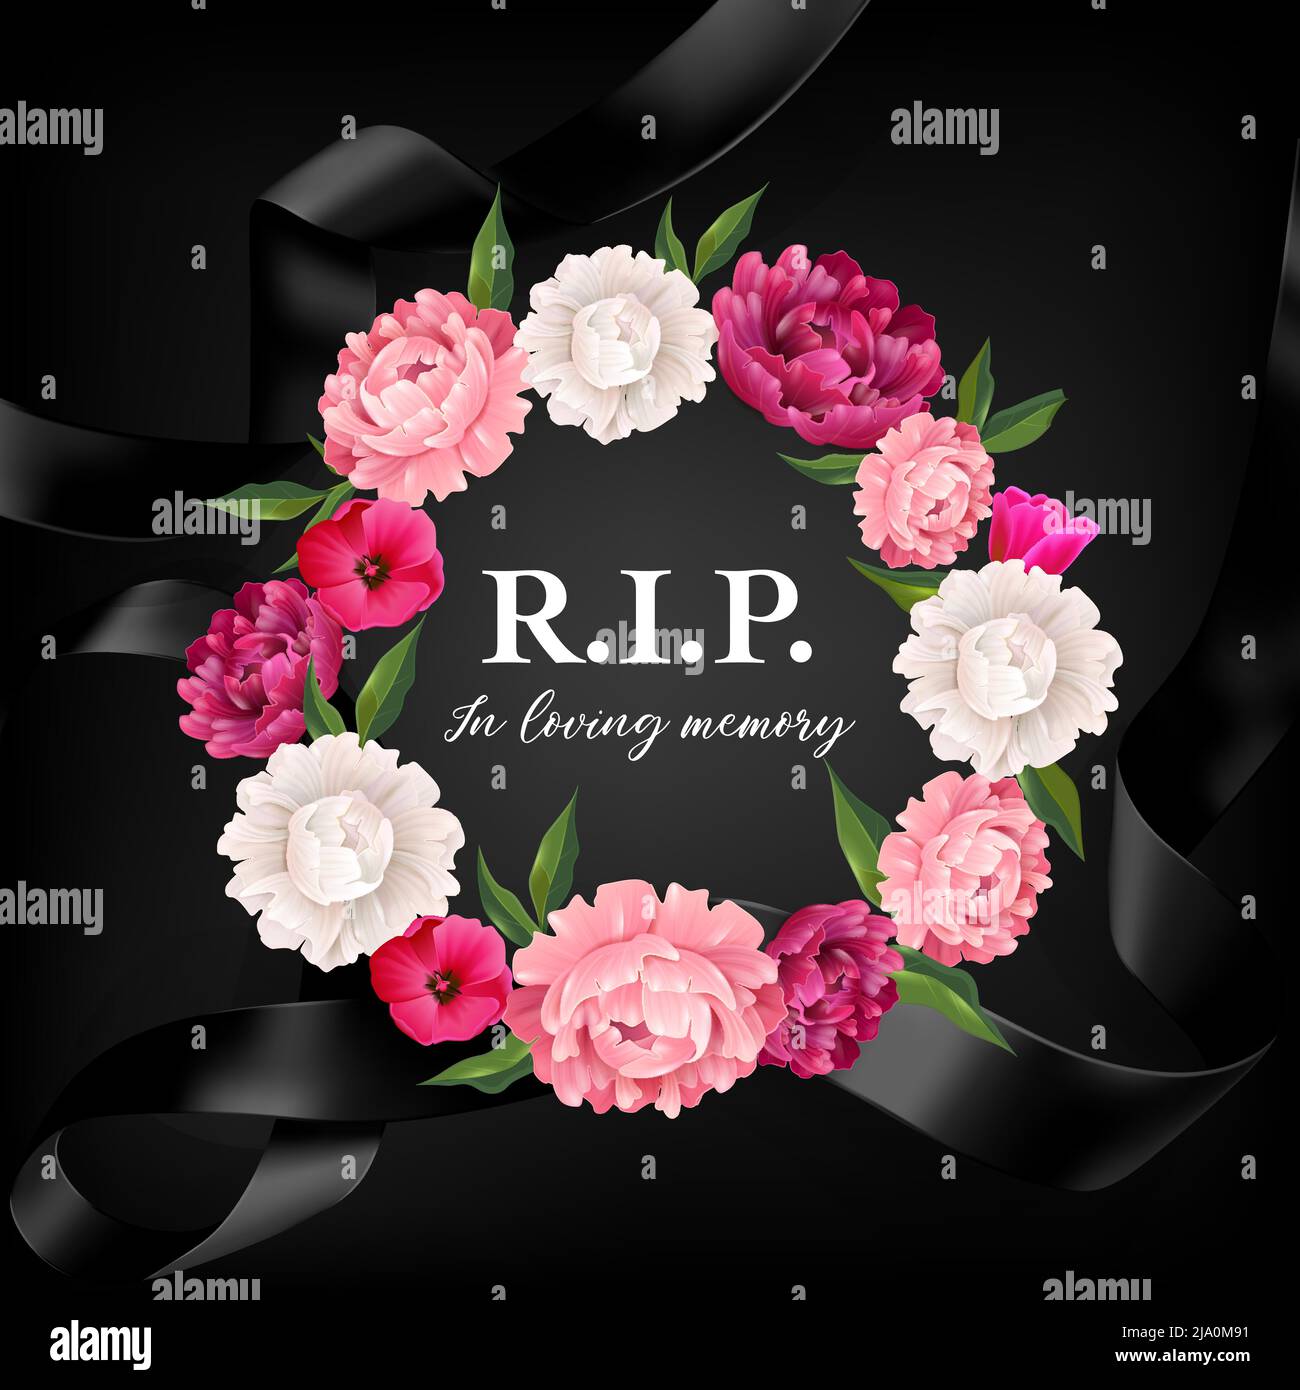 In loving memory composition with editable ornate text surrounded by funeral wreath on black ribbon background vector illustration Stock Vector